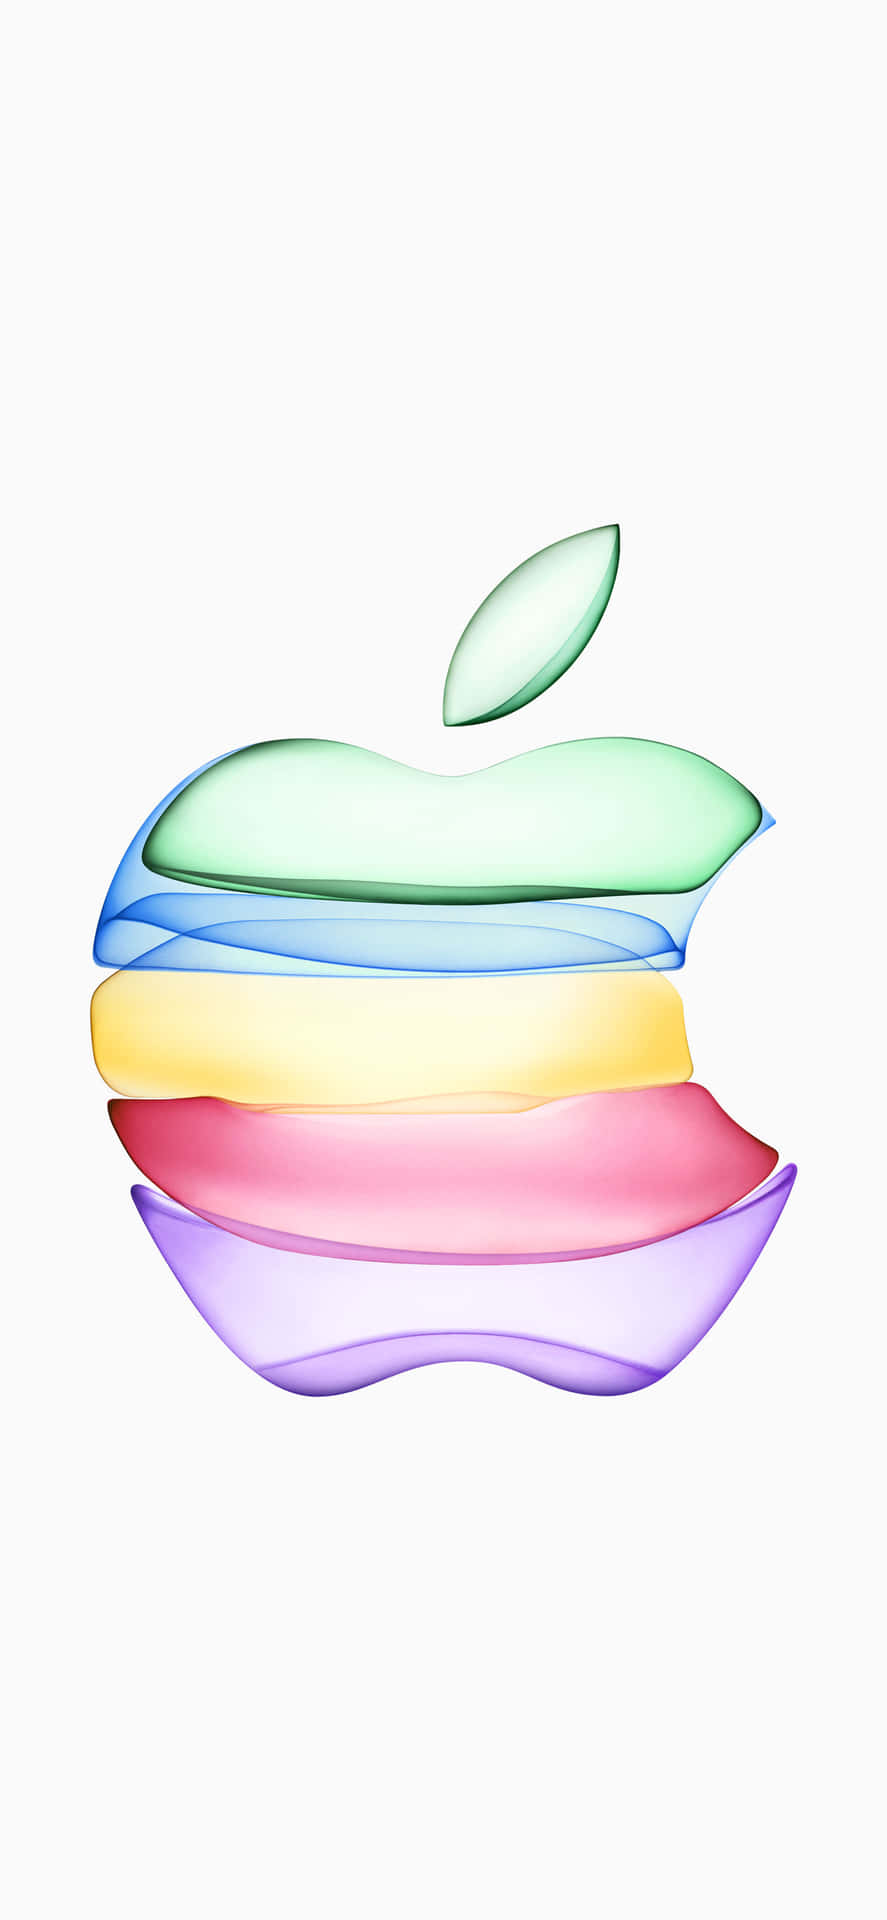 Iphone Xs Max Apple Background Colorful Apple Logo Background